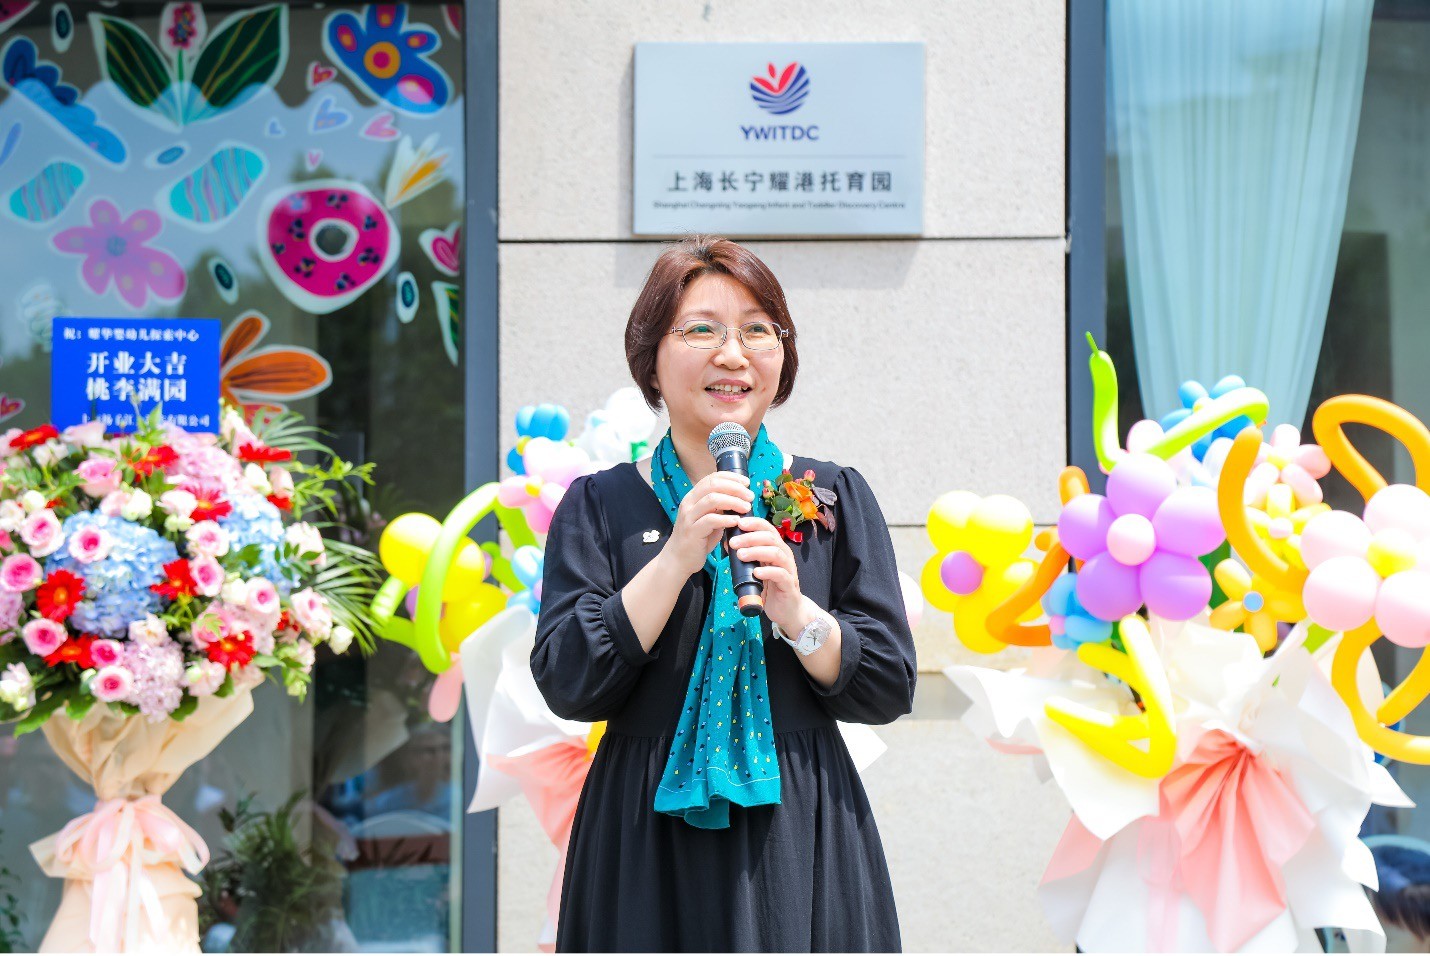 Lihong Yu, Head of the Discovery Centre, introduced the centre's developmental vision